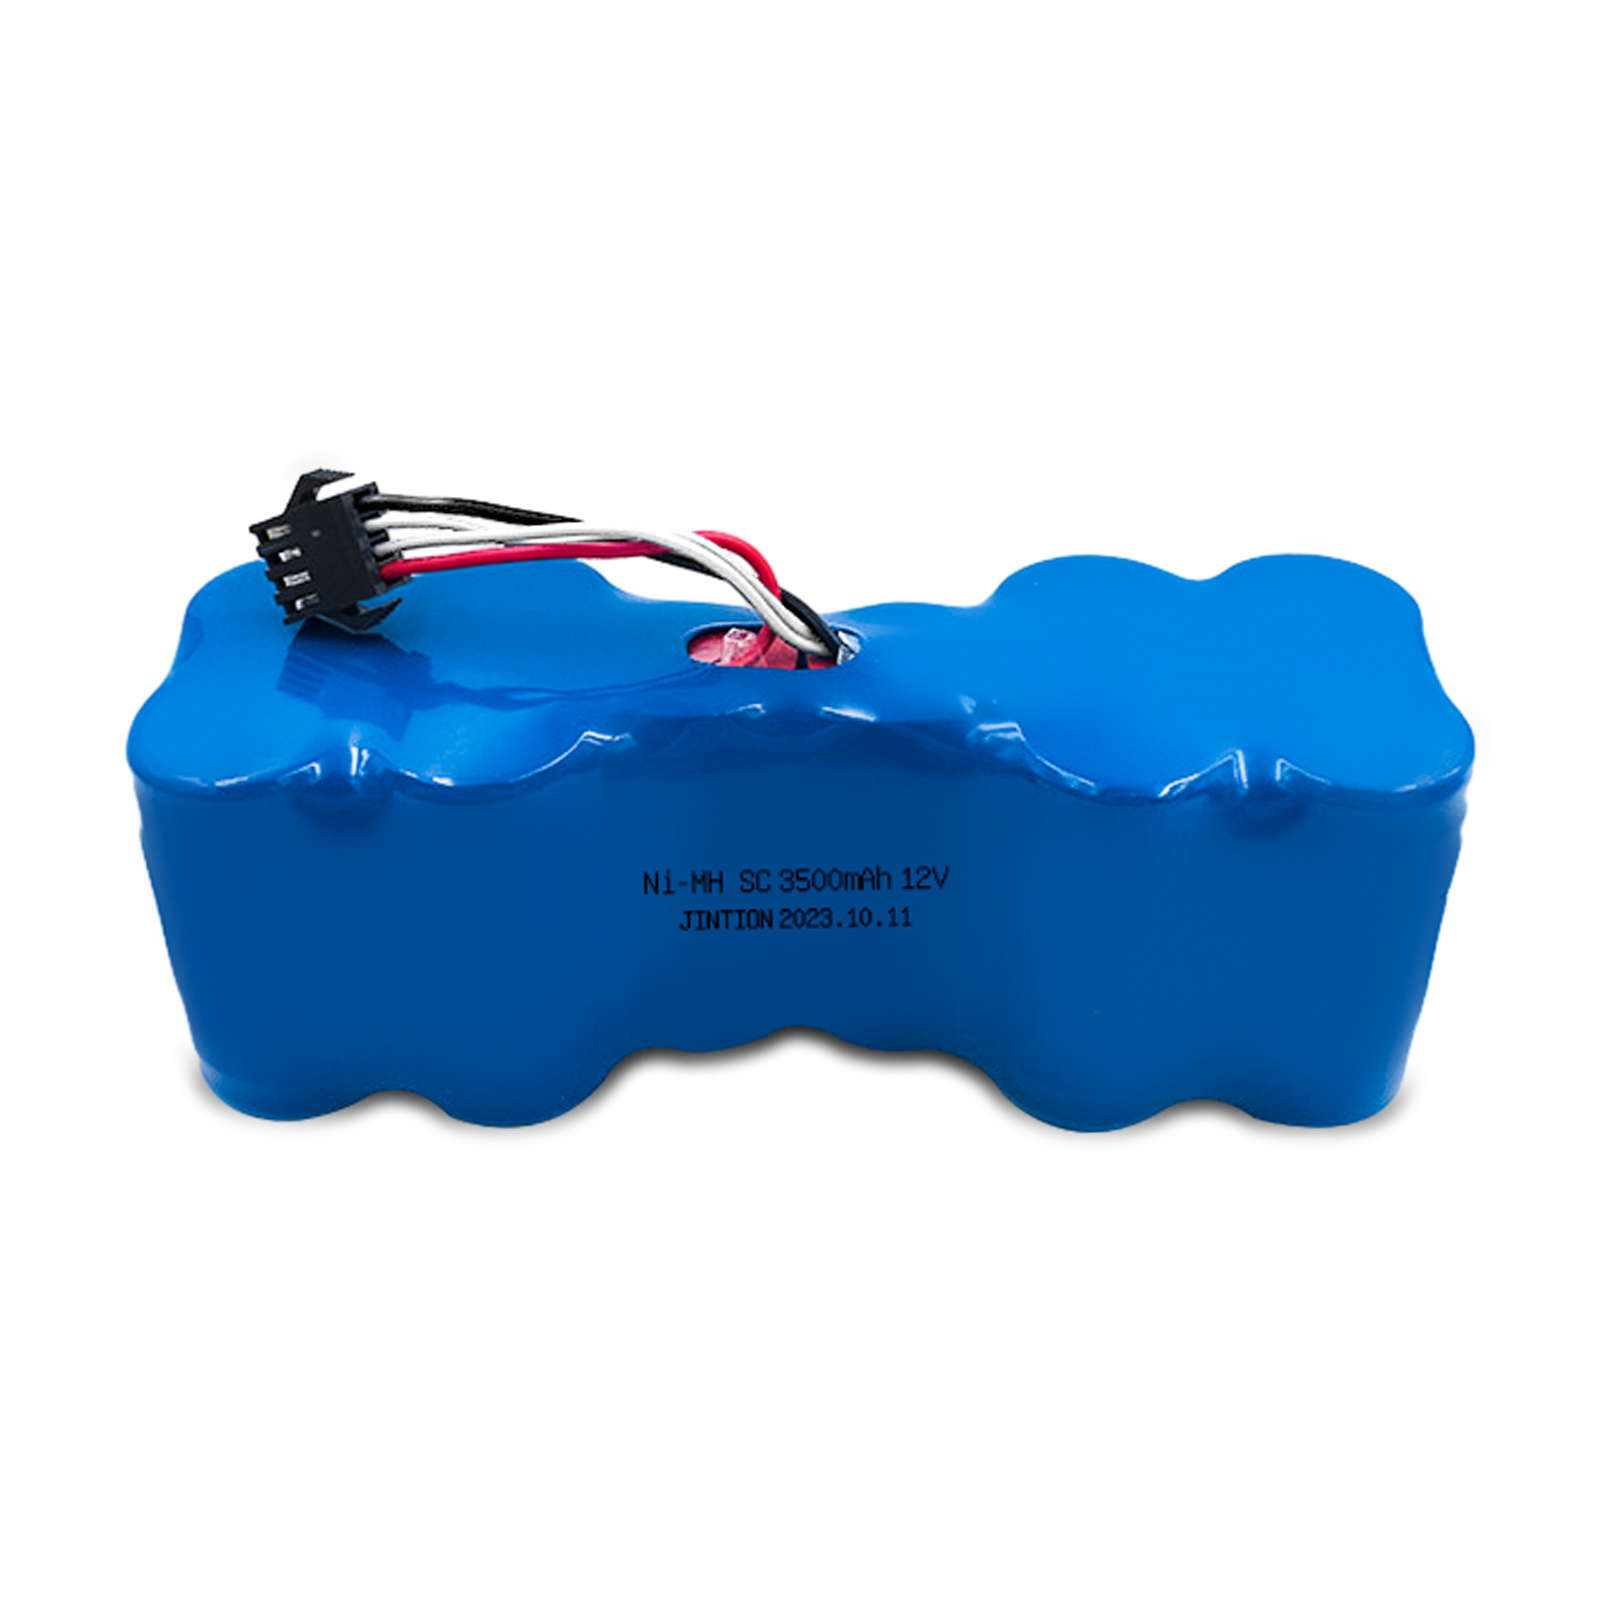 JINTION 12 volt rechargeable battery sub c 3500mah battery chargeable For Cobos Dibao Mupo DW700 sweeper